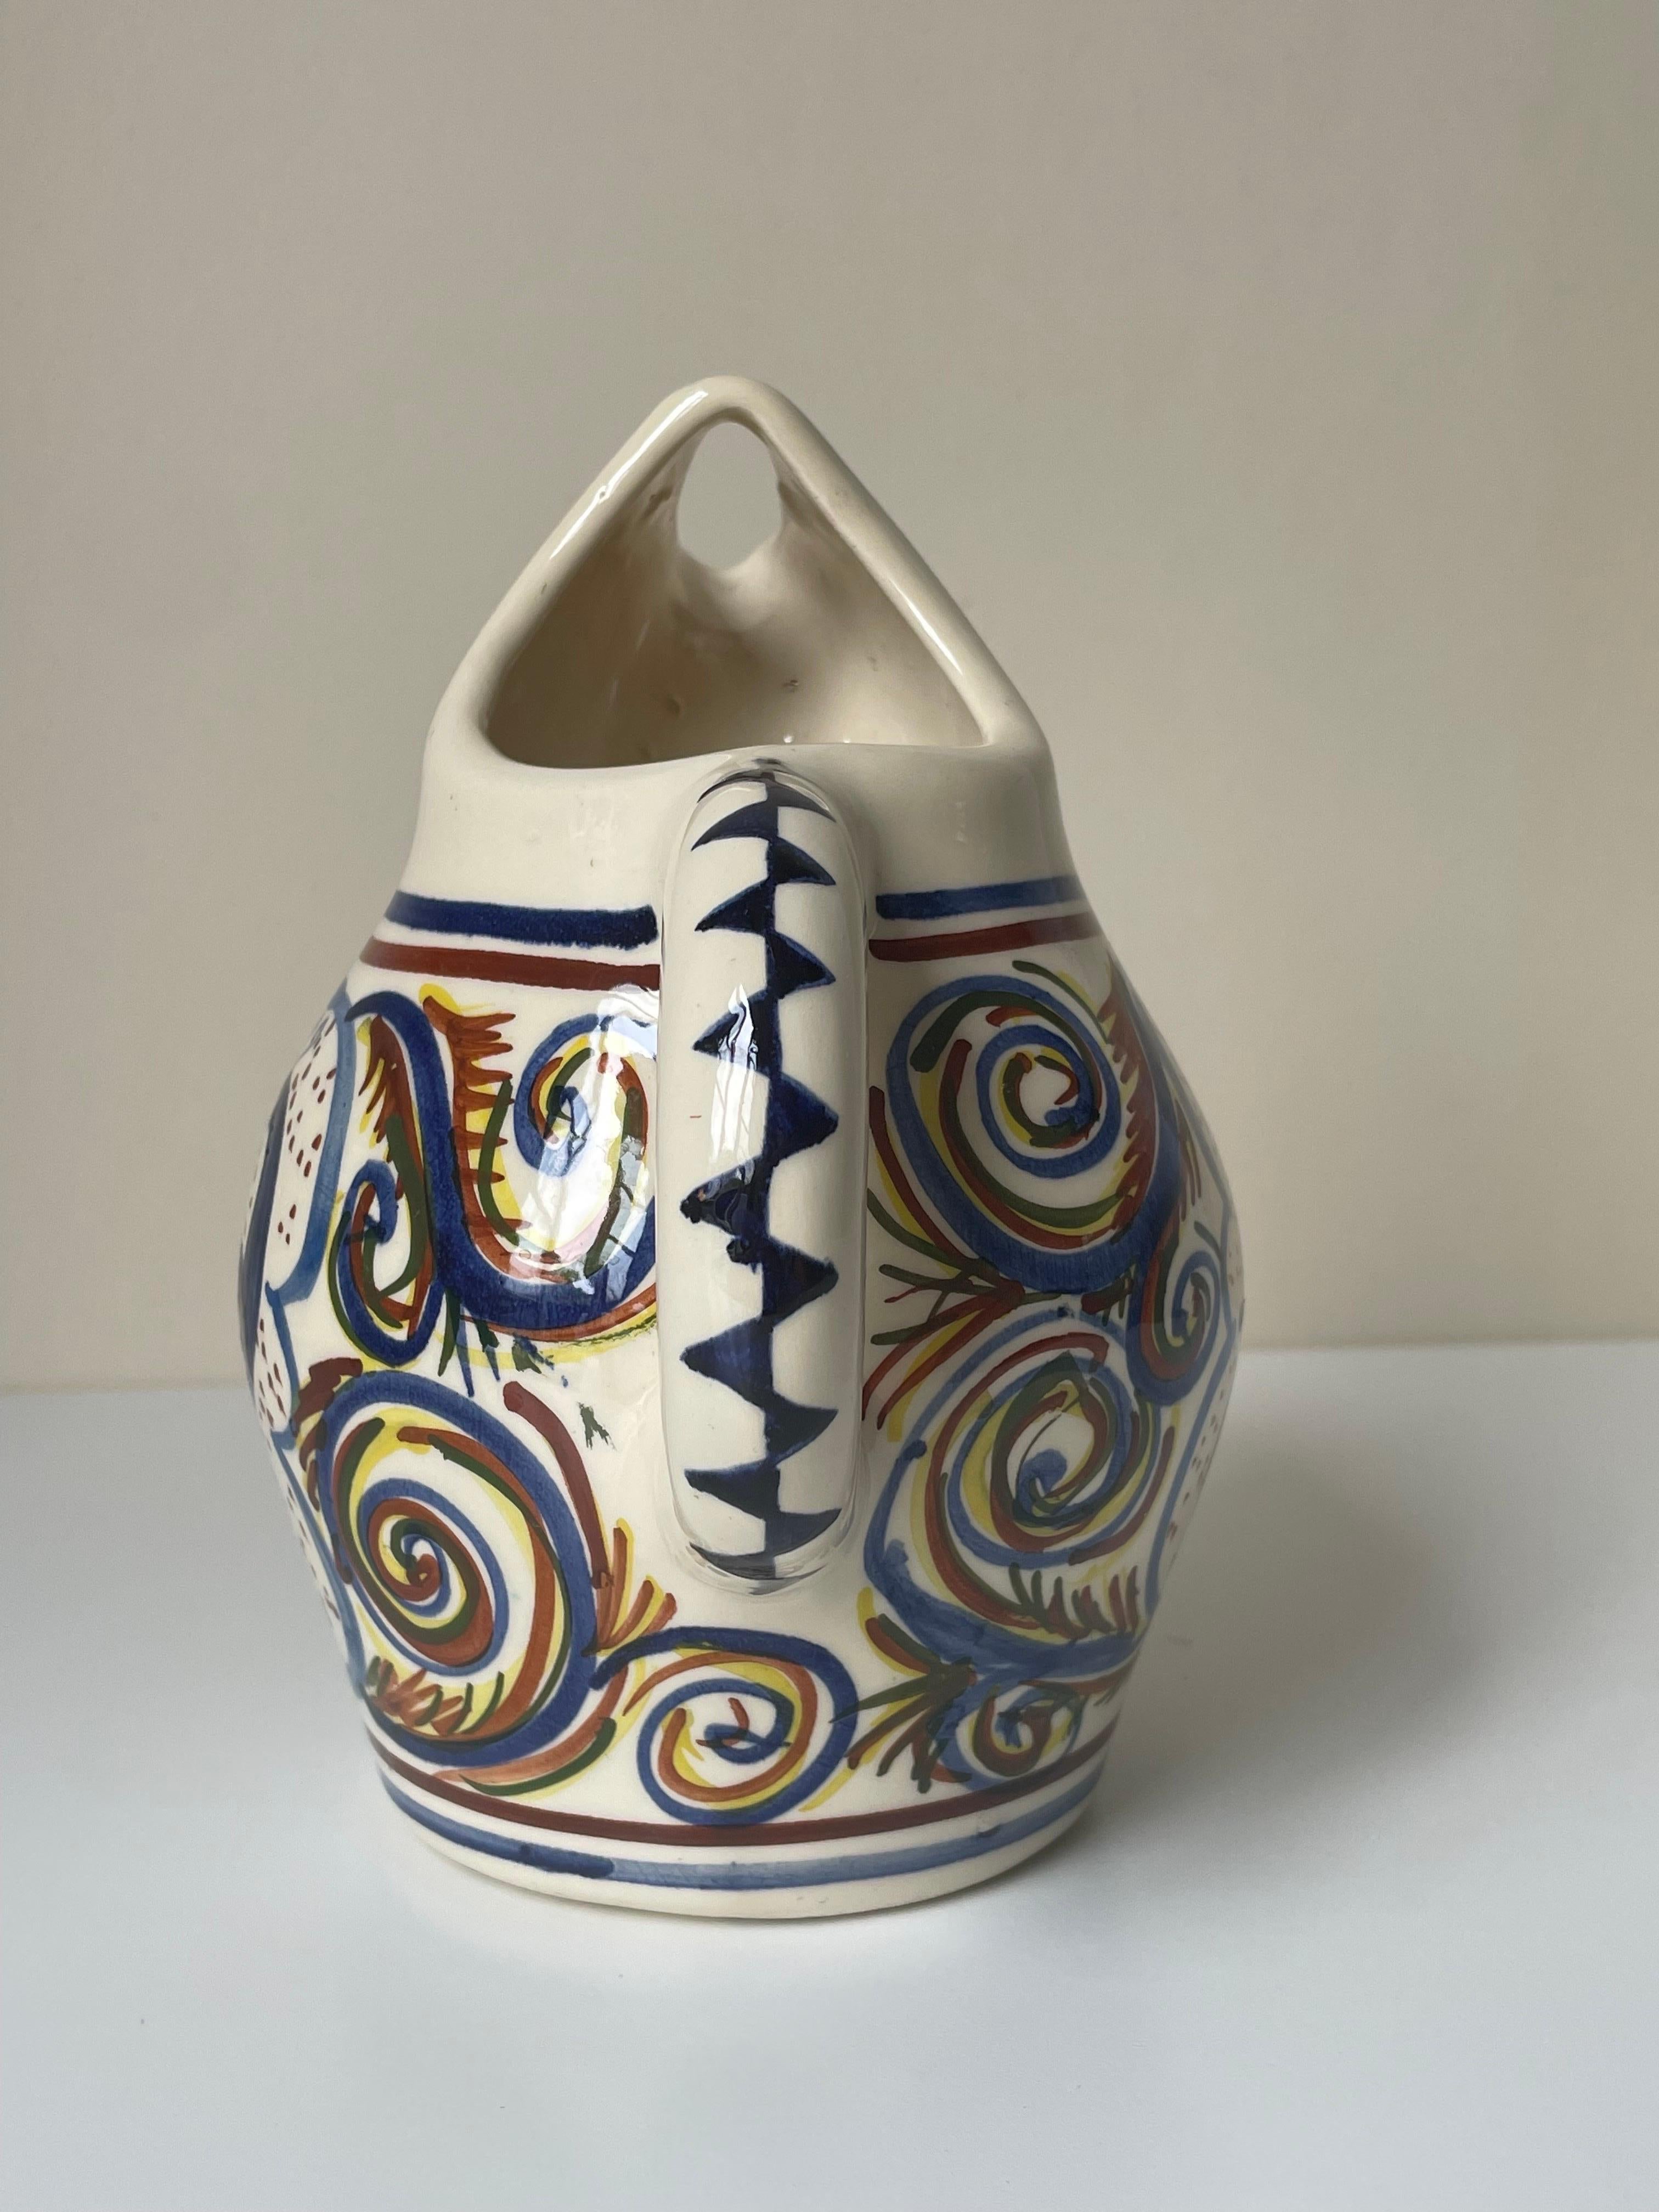 European Hand-Painted Multicolored Ceramic Pitcher Vase For Sale